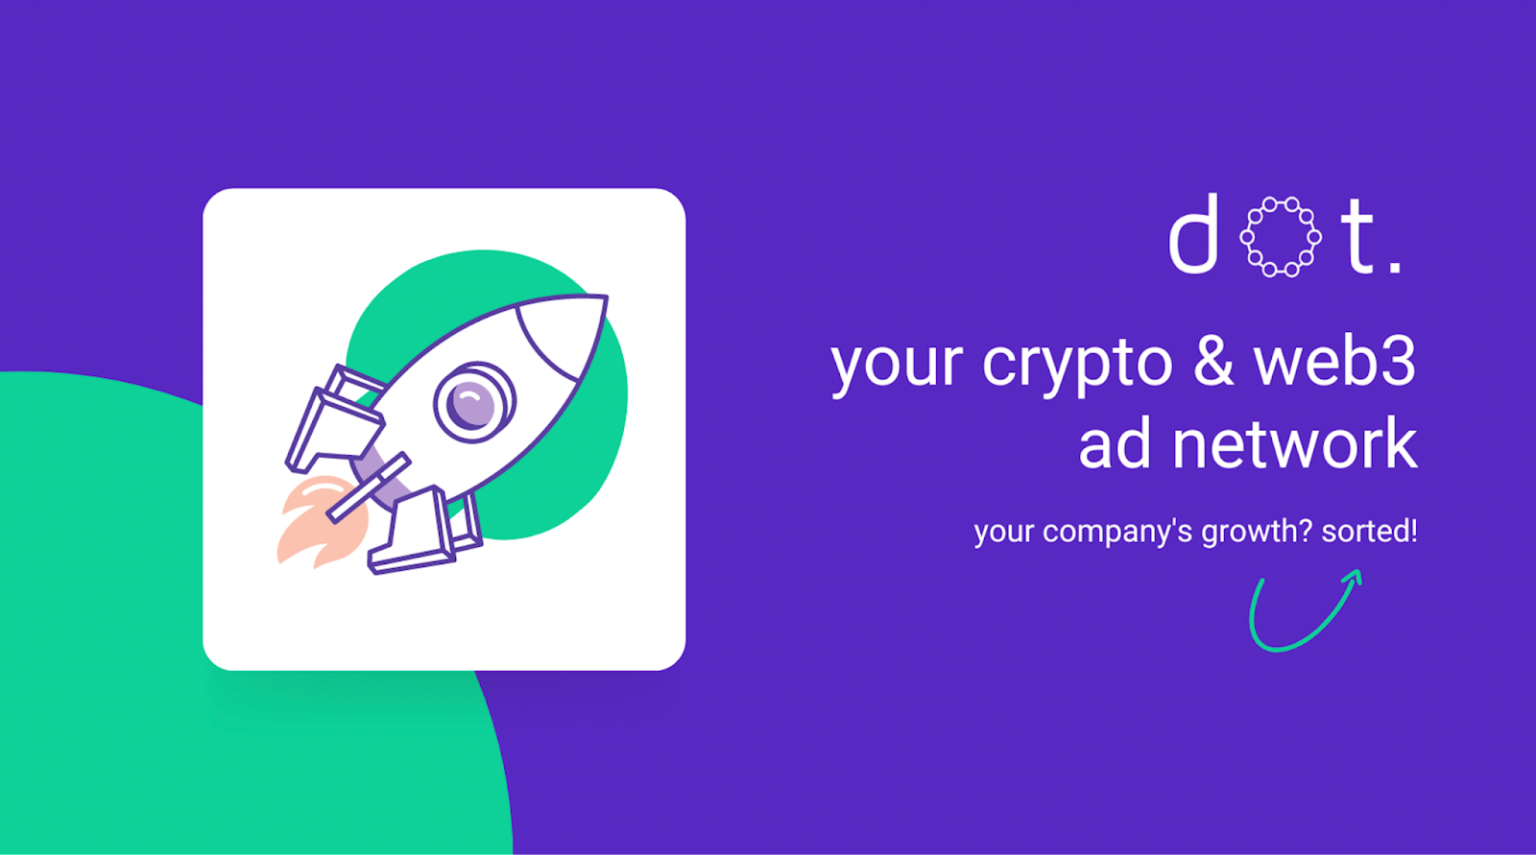 DOT - The Crypto & Web3 Ad Network Review